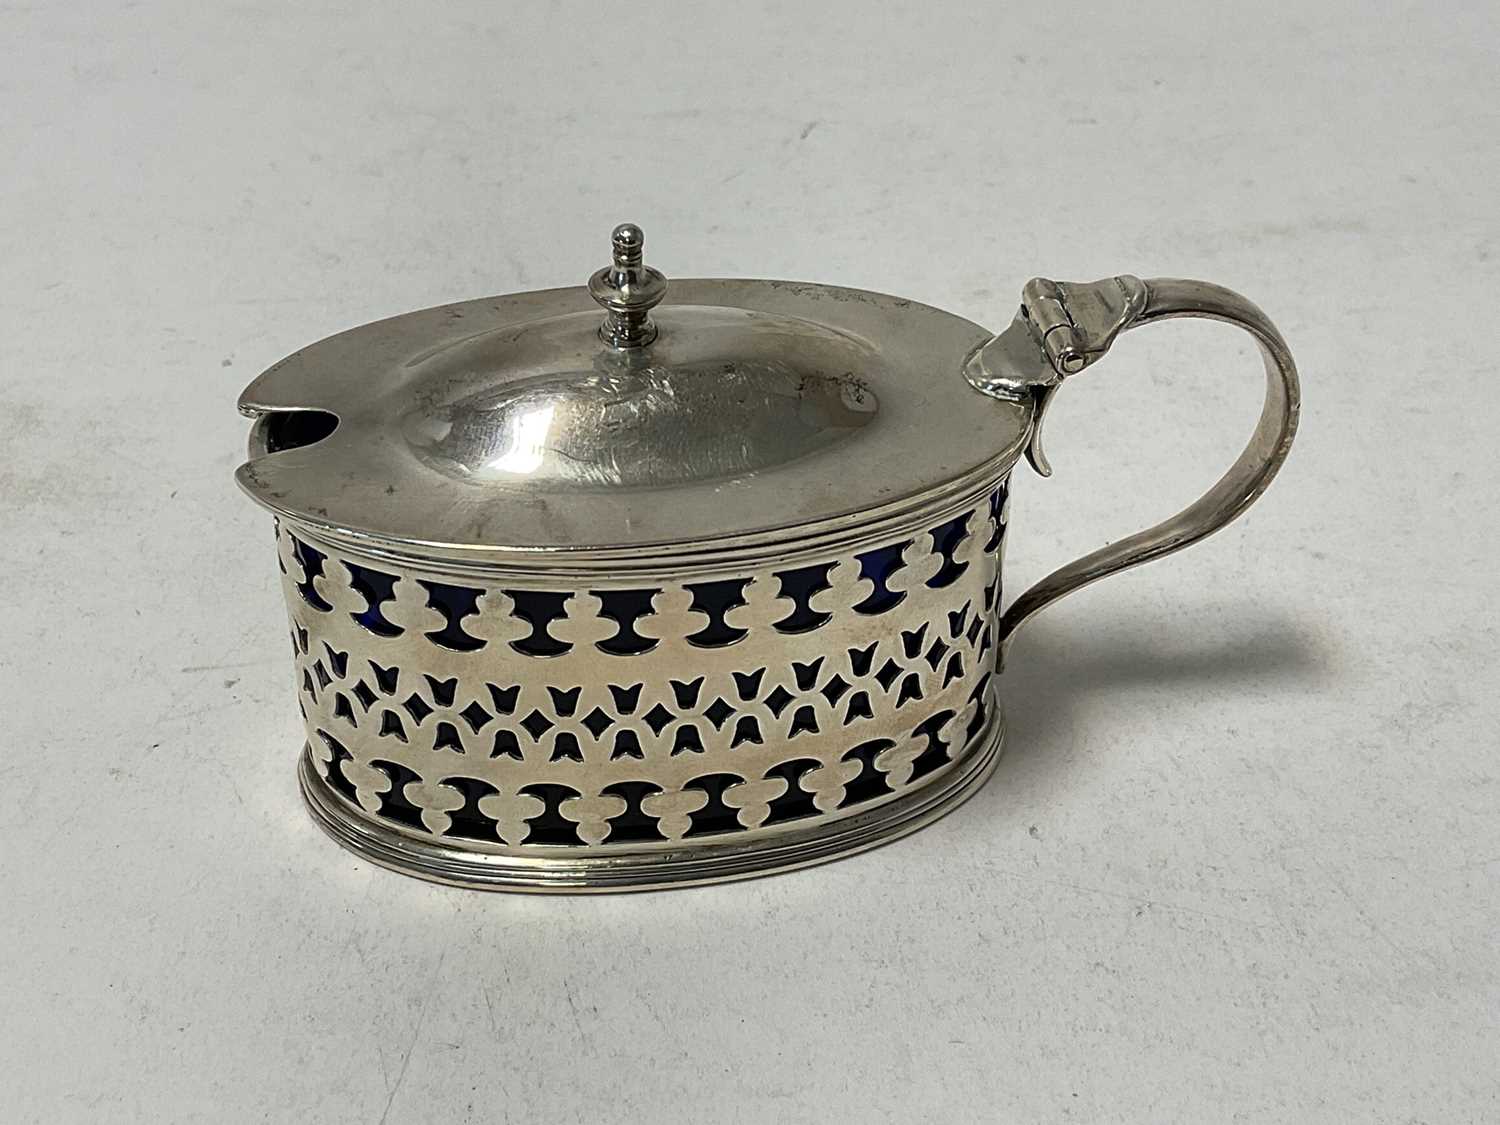 Lot 124 - Edwardian silver mustard pot of oval form, with pierced decoration and blue glass liner, (London 1906), 9.5cm in length.